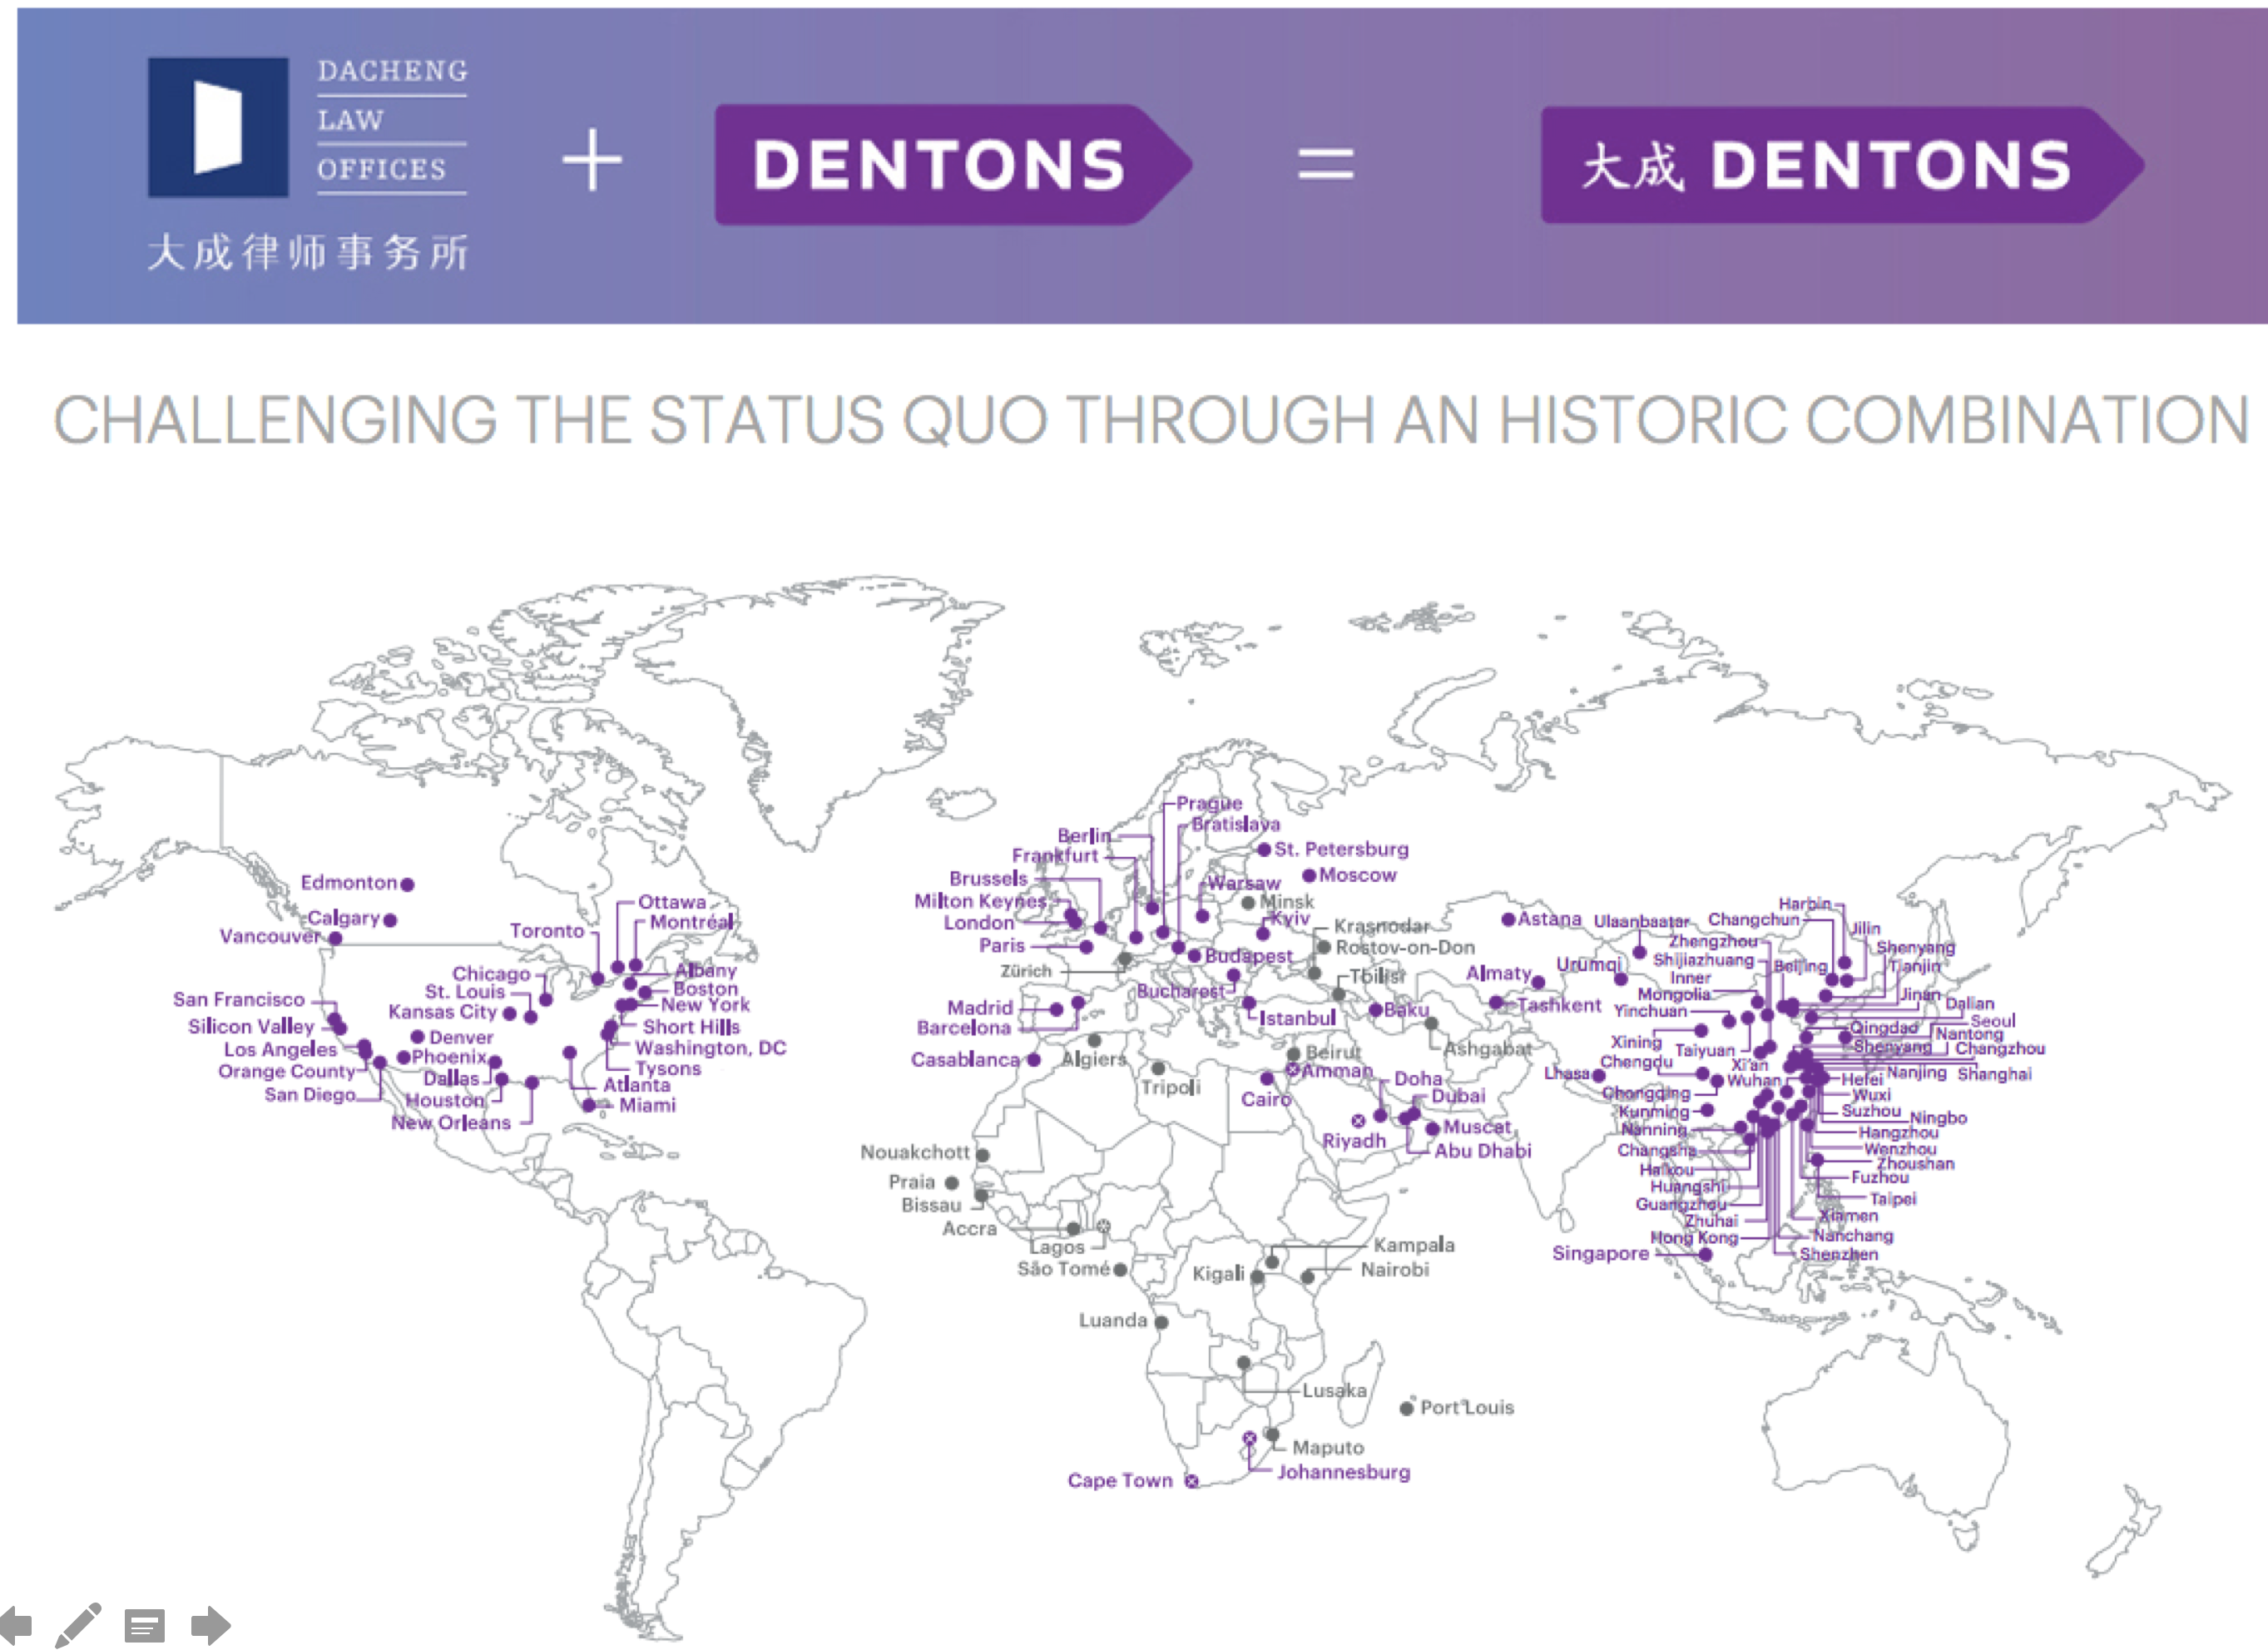 Global image showing the various office locations between Dentons and Dacheng Law Offices merger. 